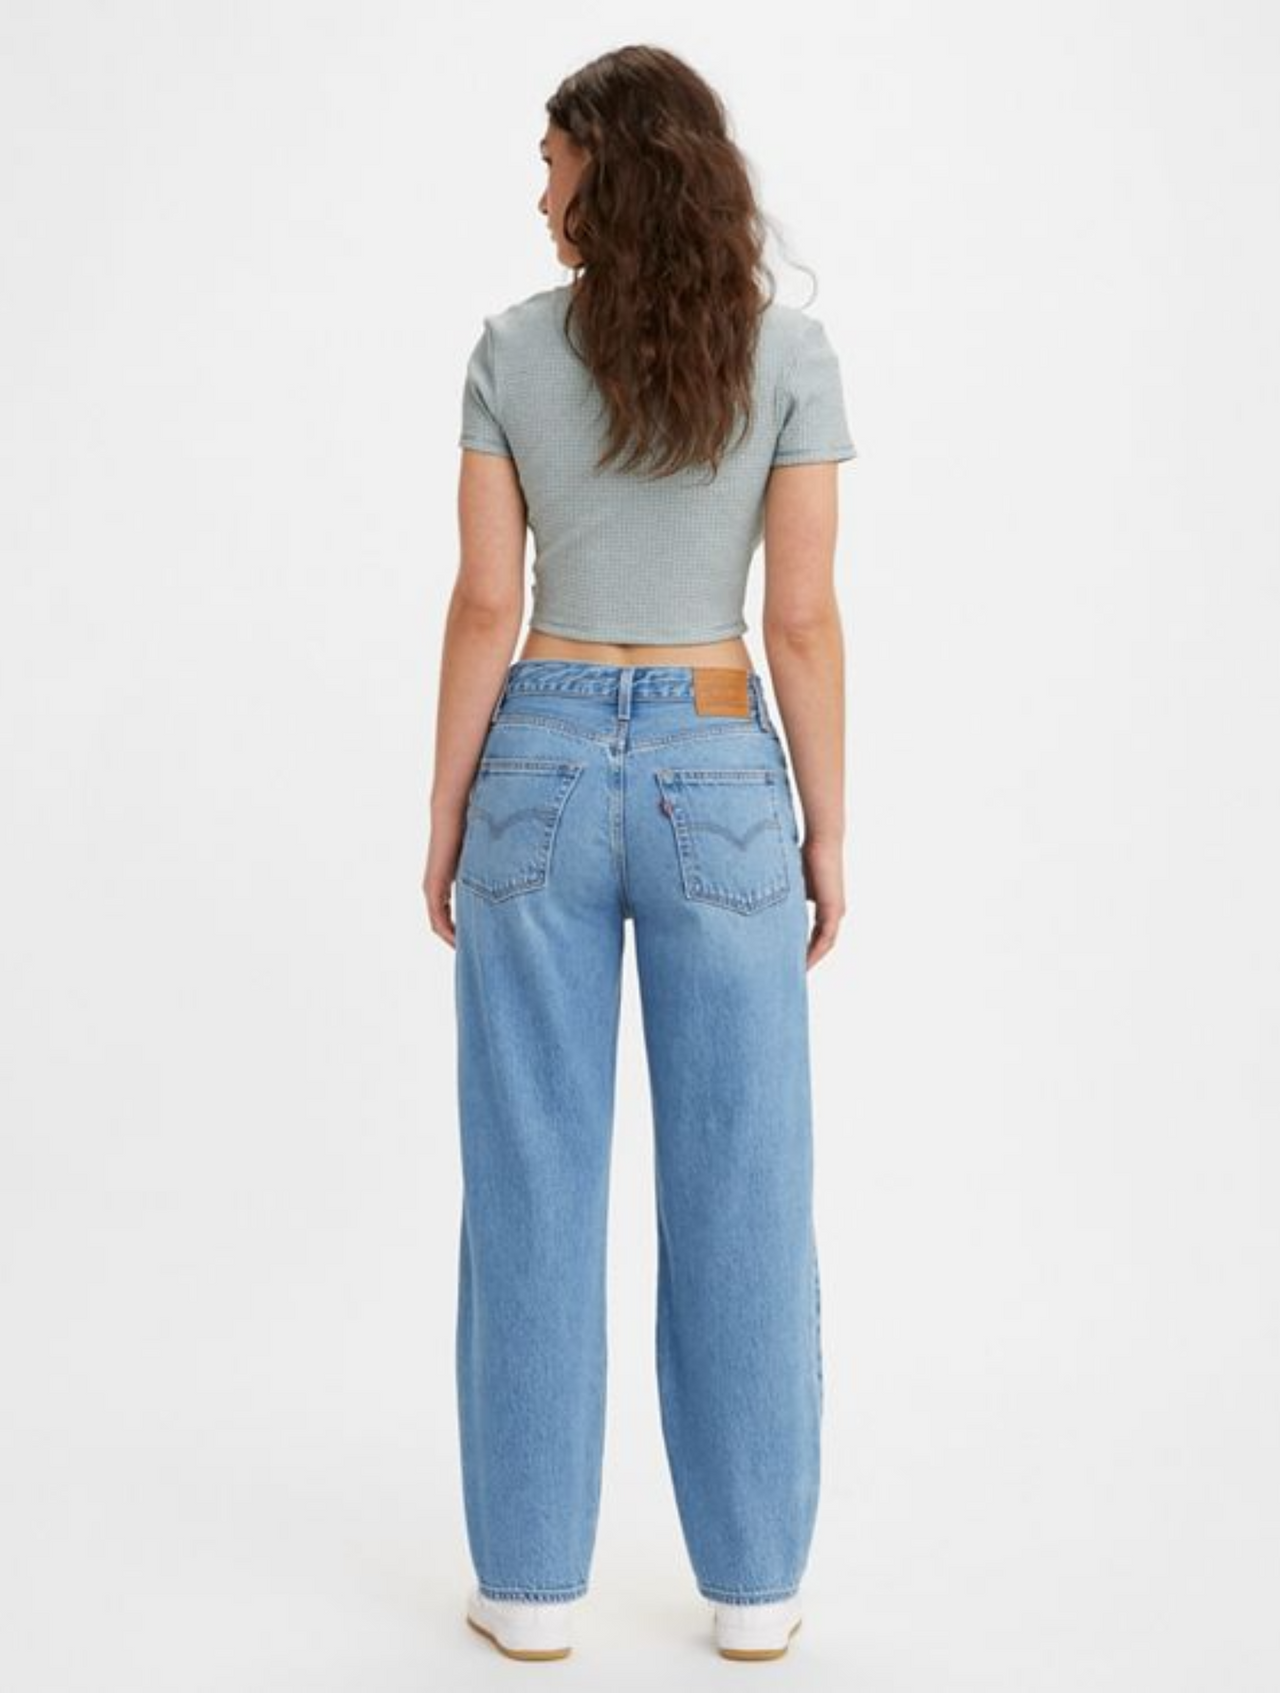 Levi's® Baggy Dad Jeans in The Middle with Damage 25 30 at